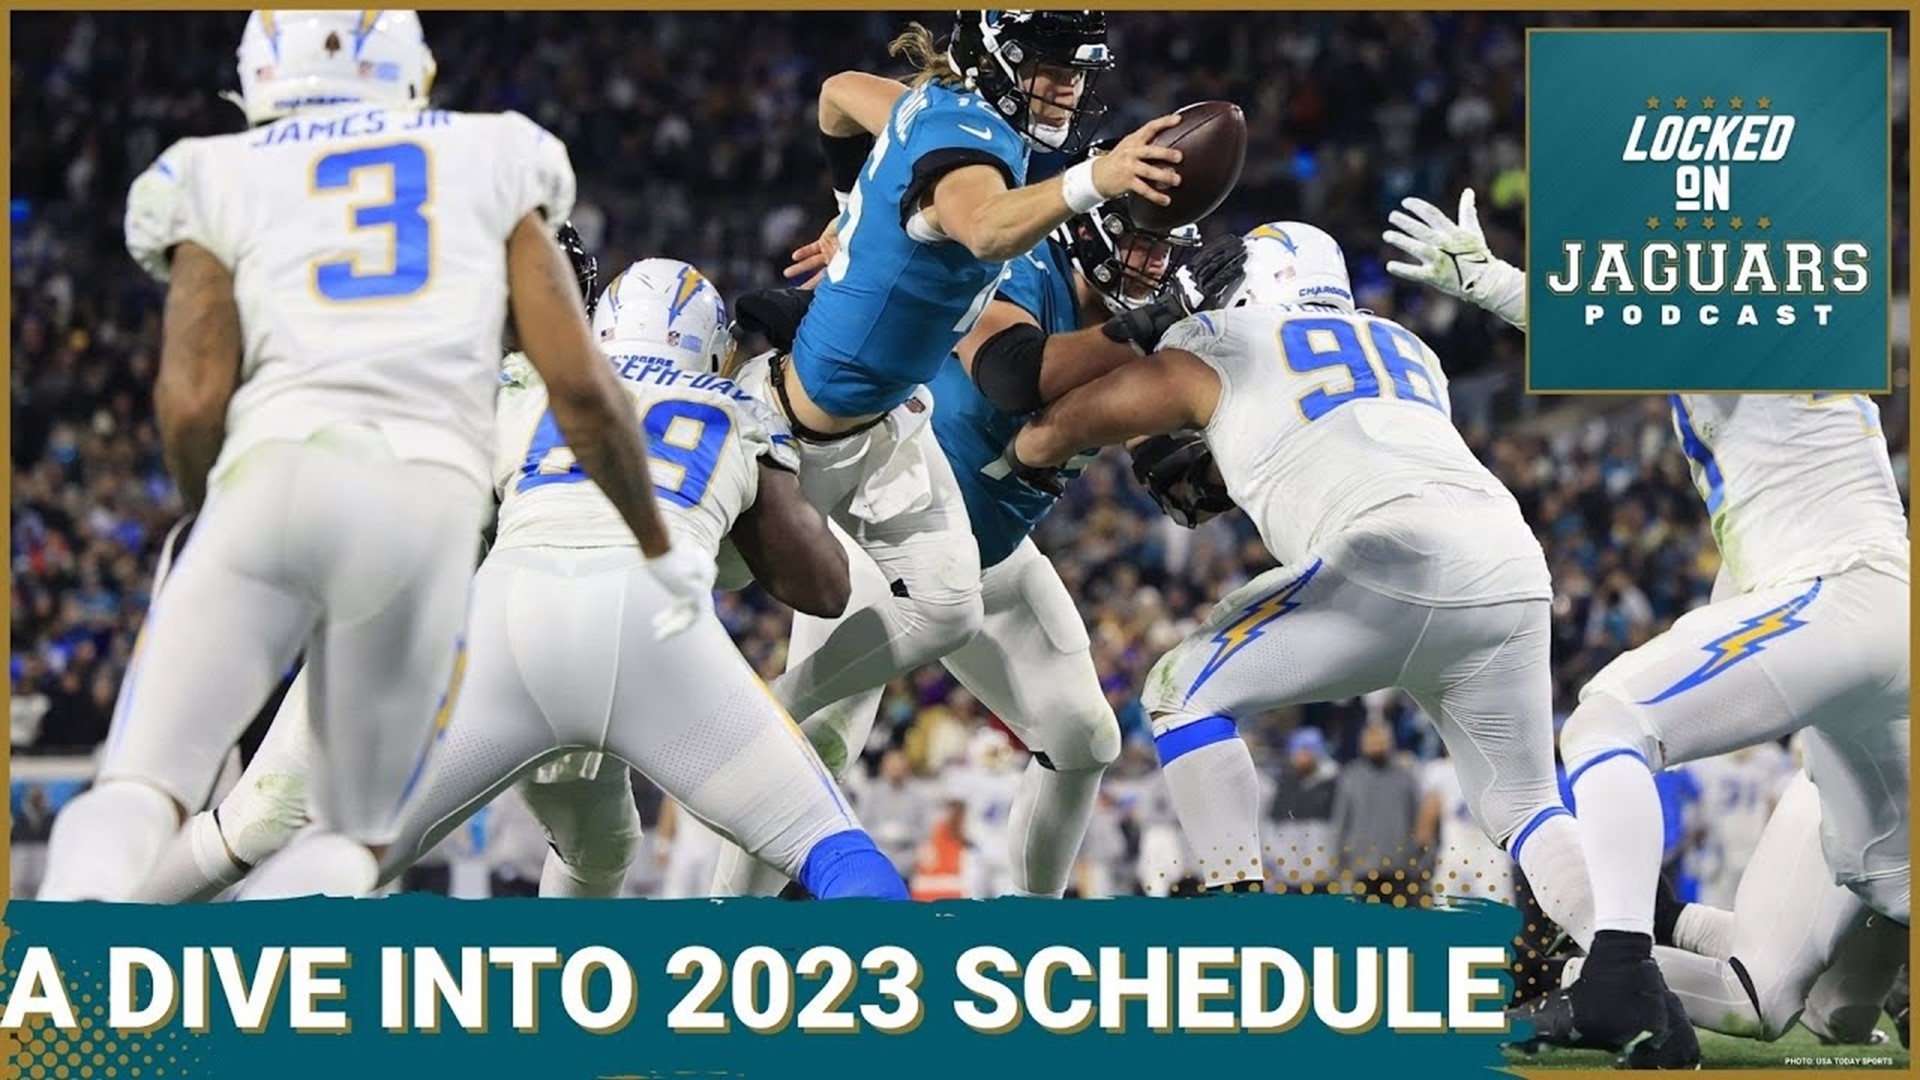 Jacksonville Jaguars fans can plan their travel and tailgates now that the order of games has been released for the 2023 seson. Where will you go?